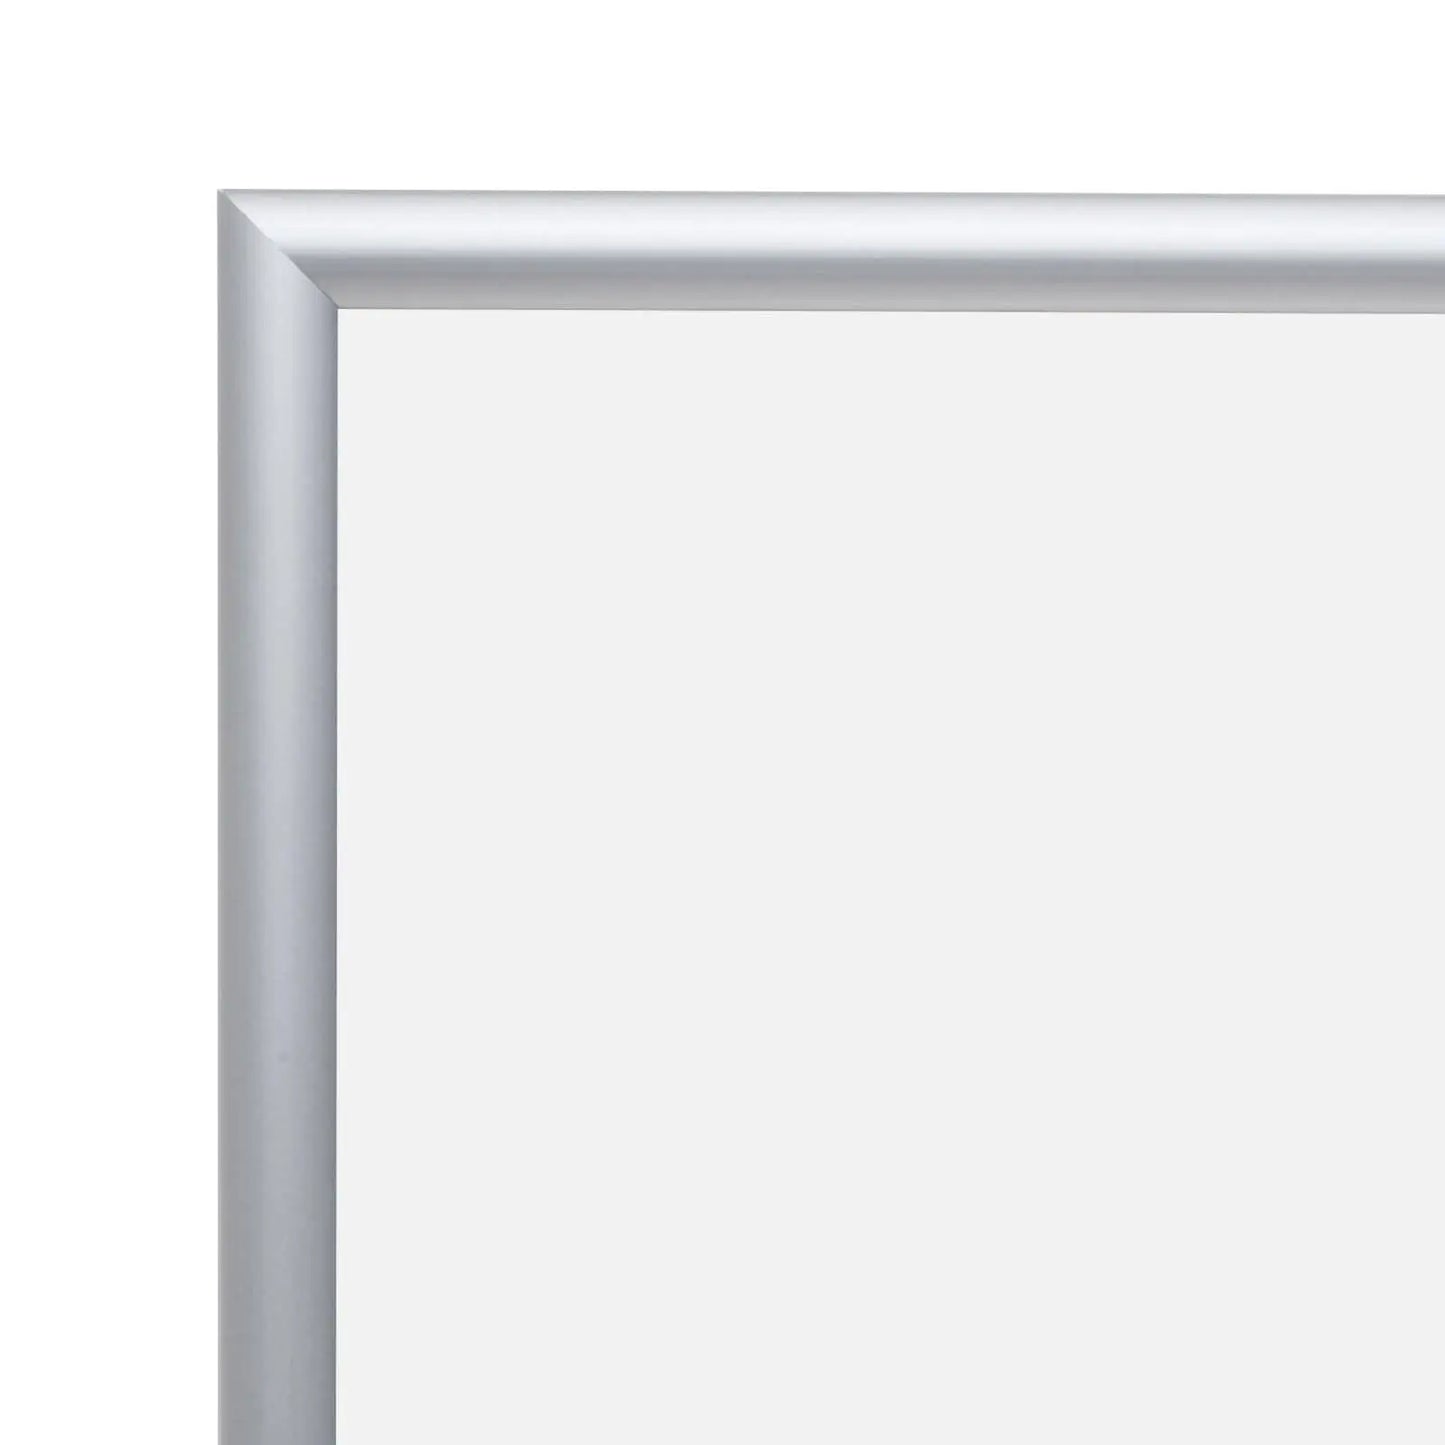 20x30 Inches Silver Snap Frame - 1" Profile - Snap Frames Direct